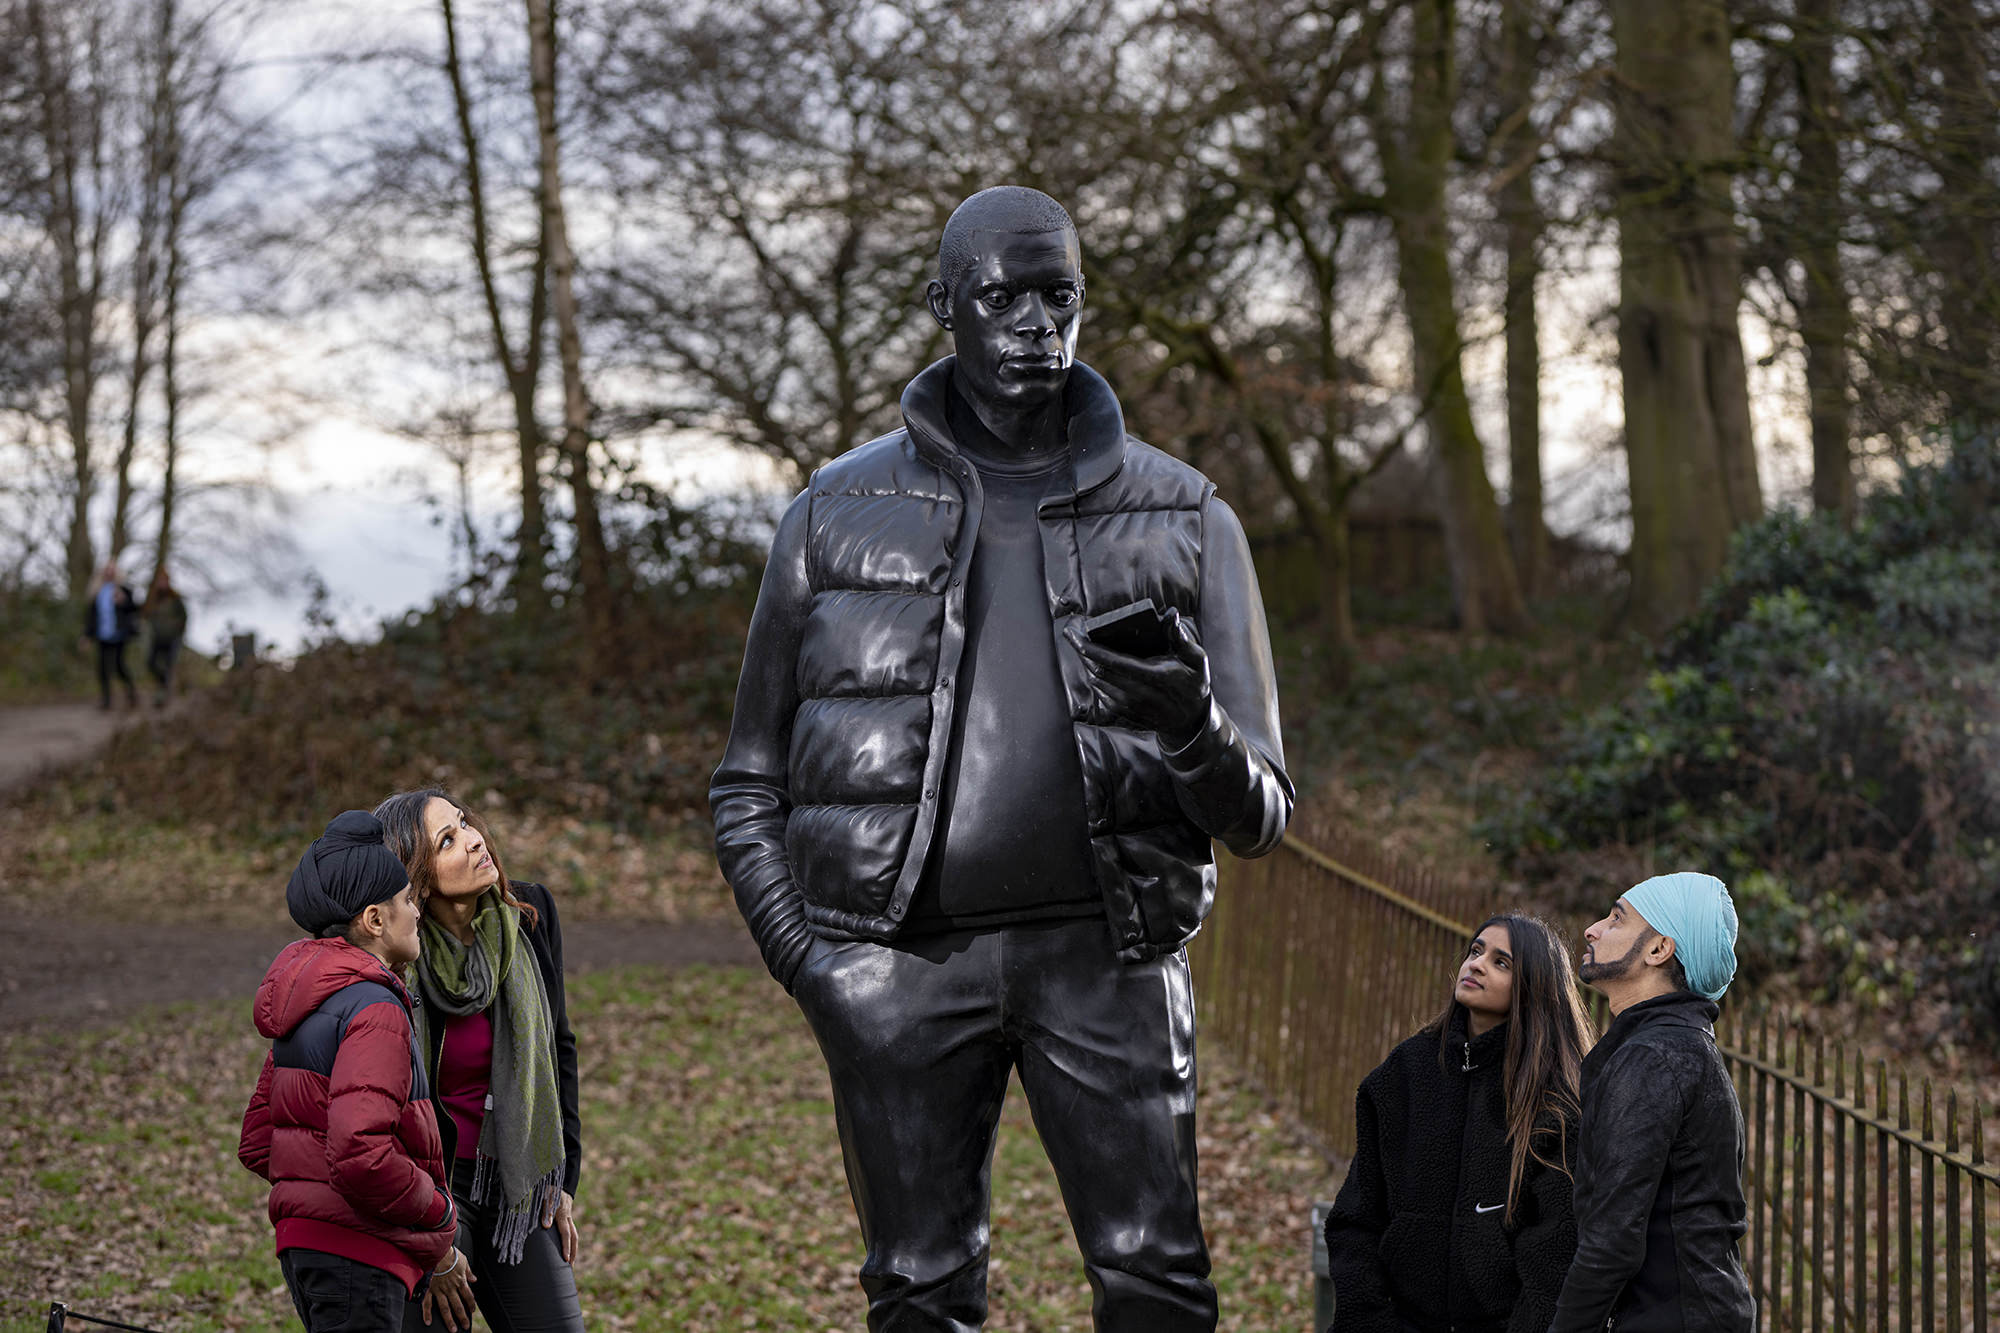 Four people looking up at a larger-than-life-size sculpture of a man holding a mobile phone.